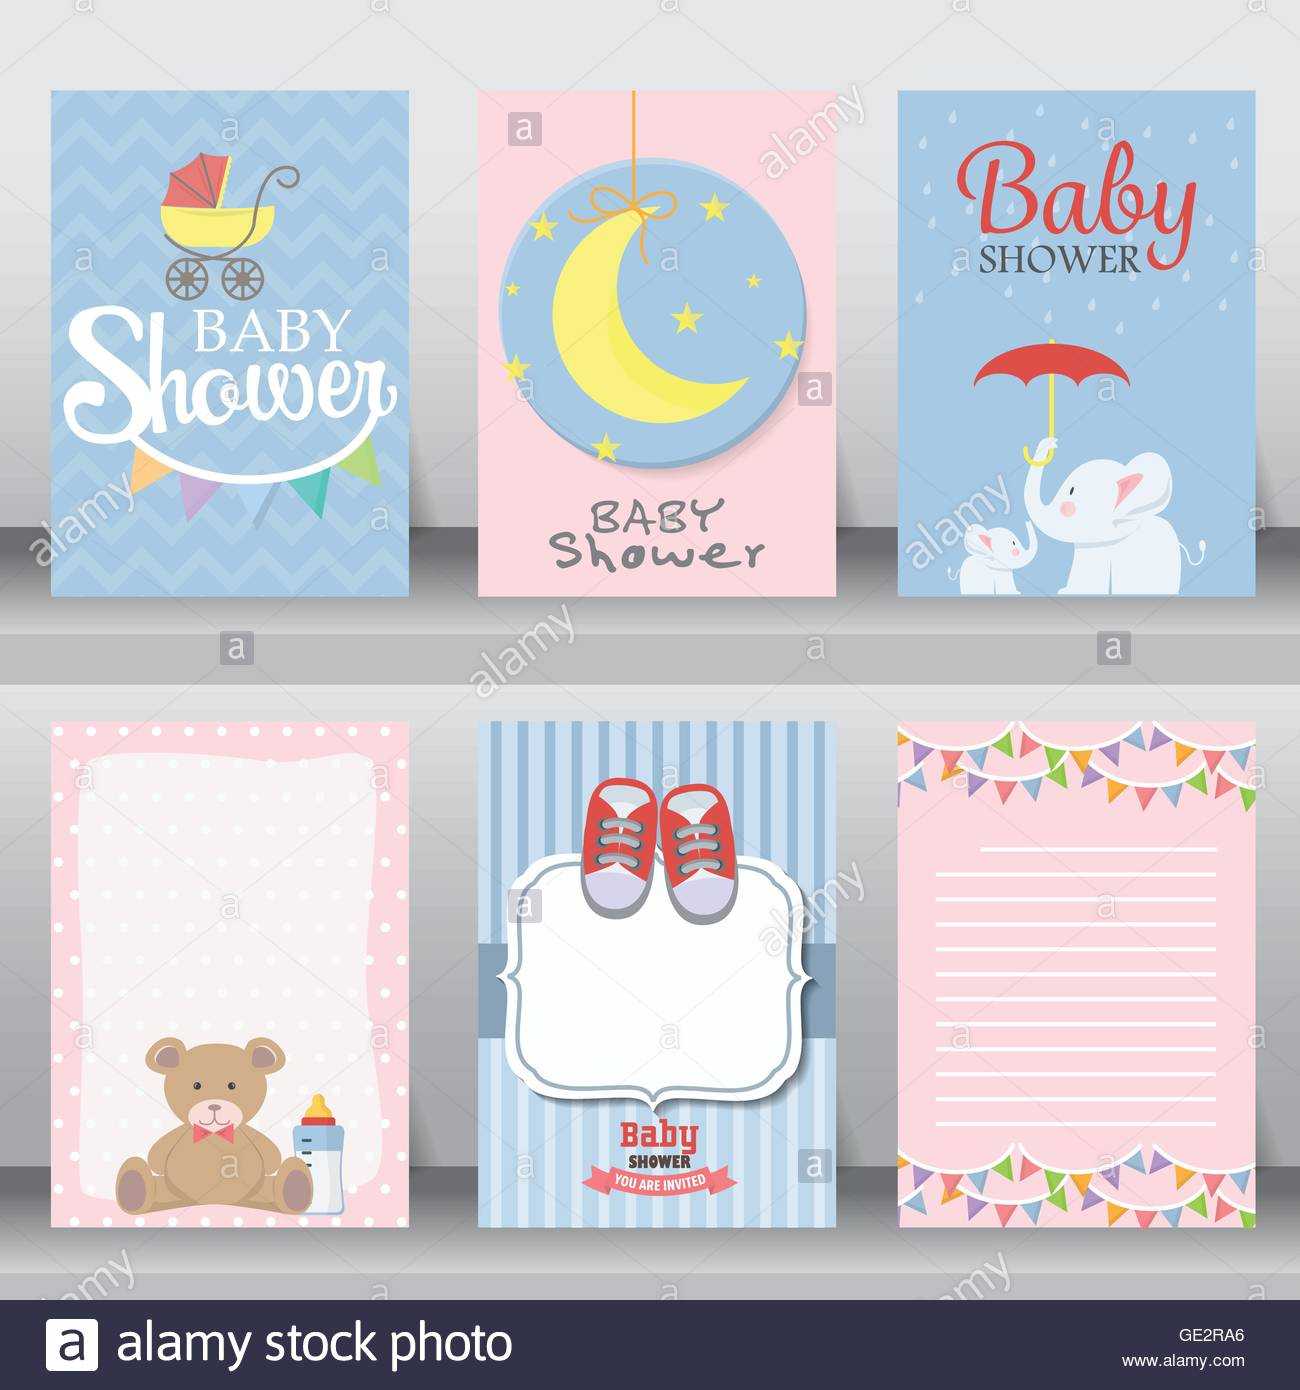 Baby Shower Party Greeting And Invitation Card. Layout Intended For Greeting Card Layout Templates